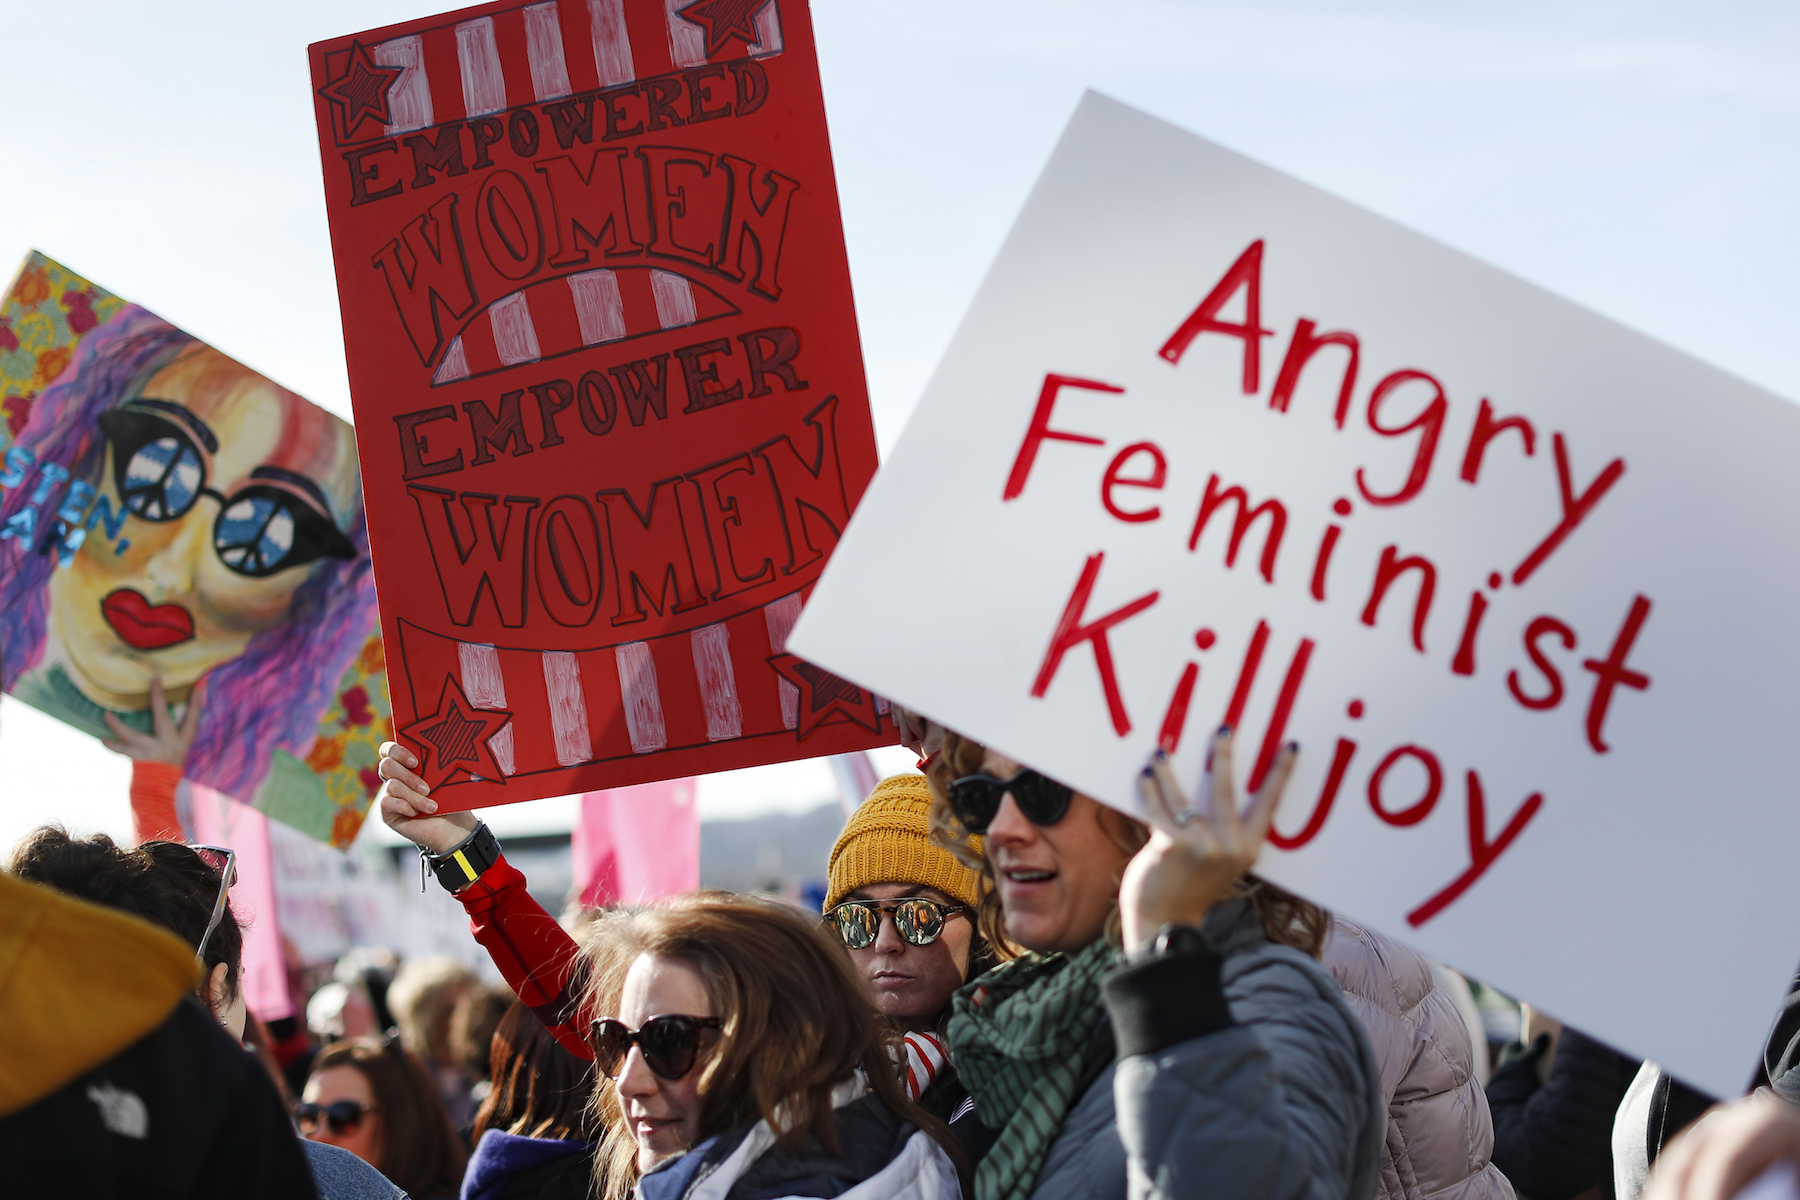 PHOTOS: Women's marches across the country | abc13.com1800 x 1200